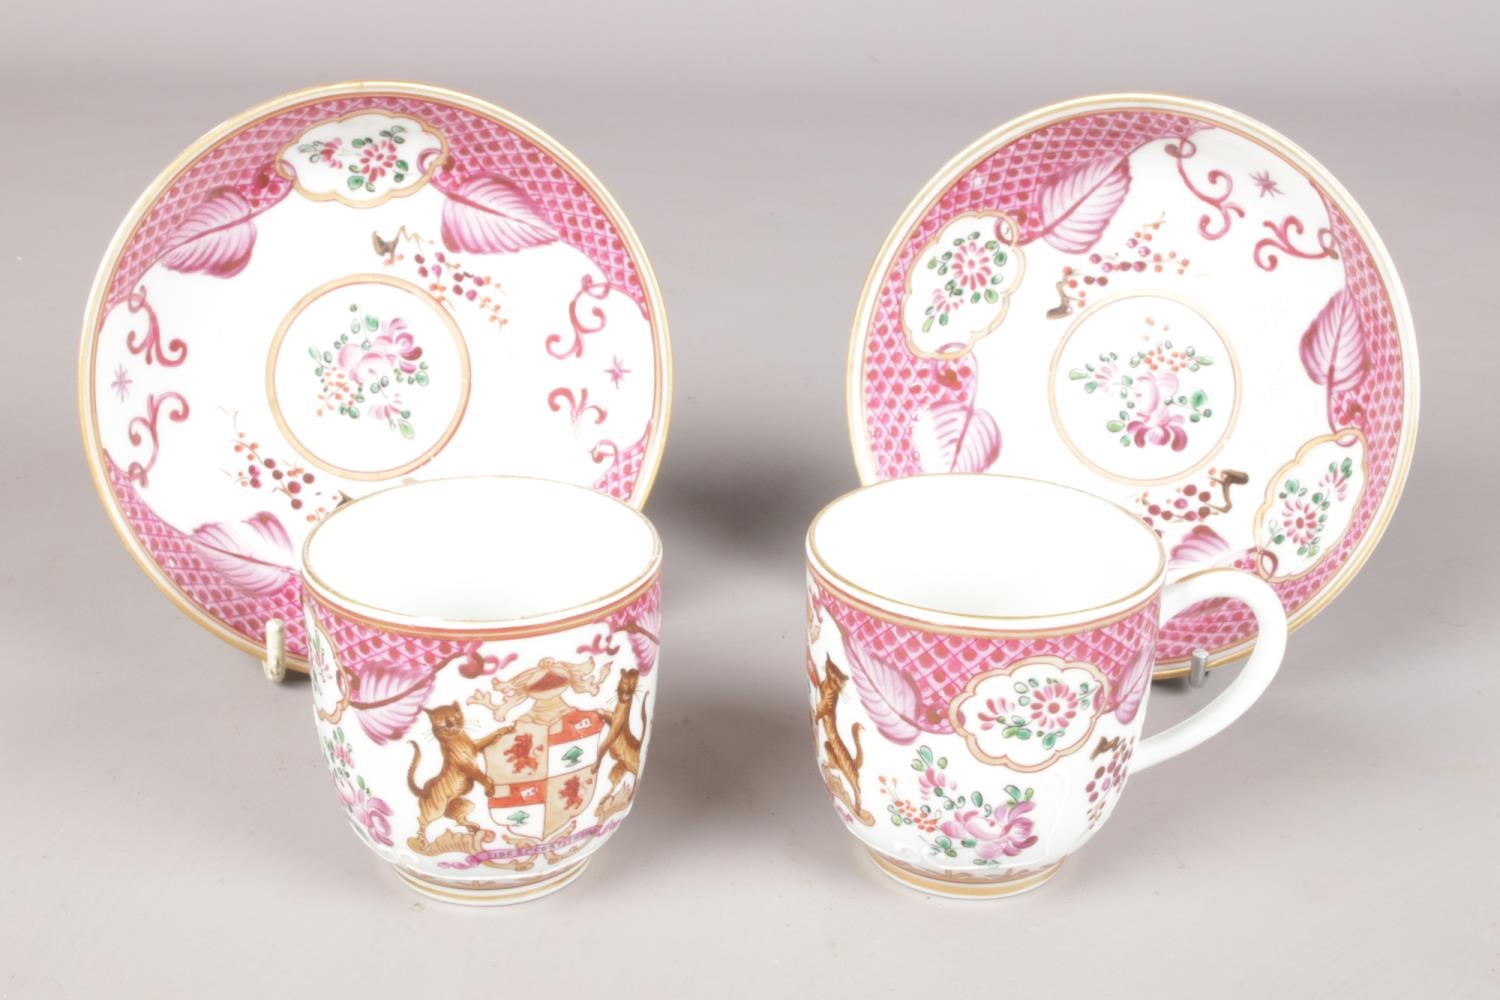 A matching pair of hand-painted 19th century Samson porcelain cups and saucers. Painted in the